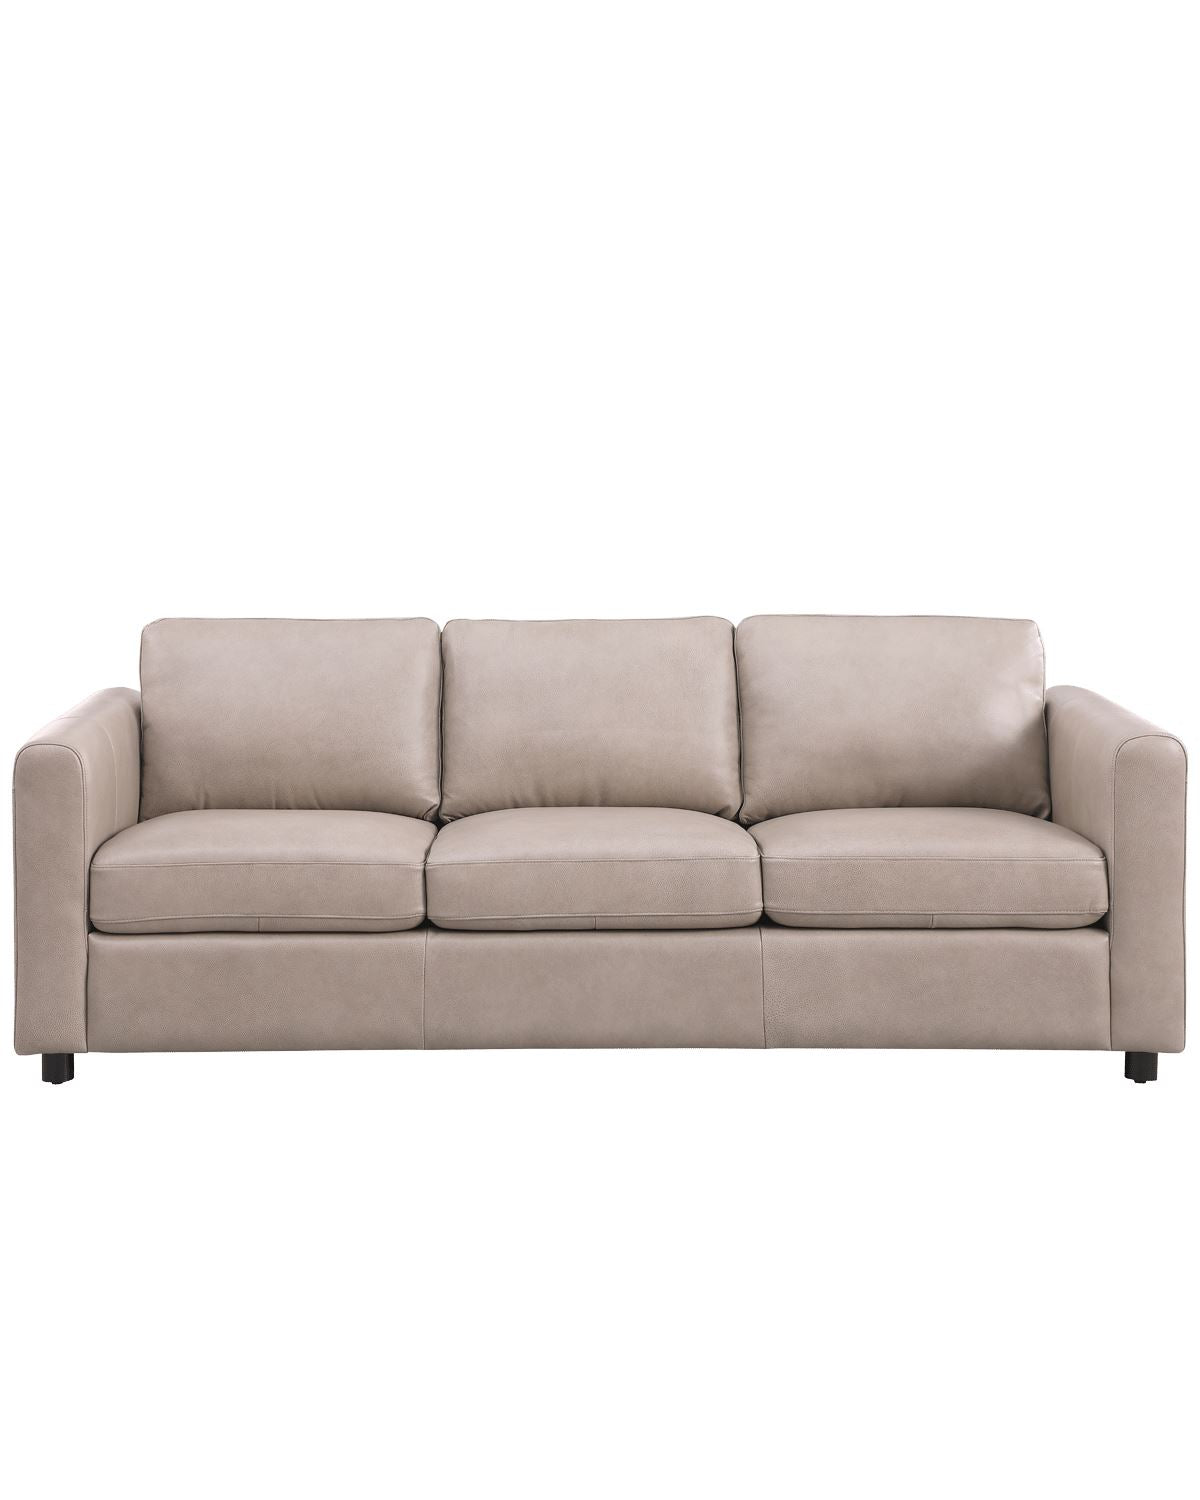 Whiskey 87" Leather Sofa by Huck & Peck SOFA Huck and Peck